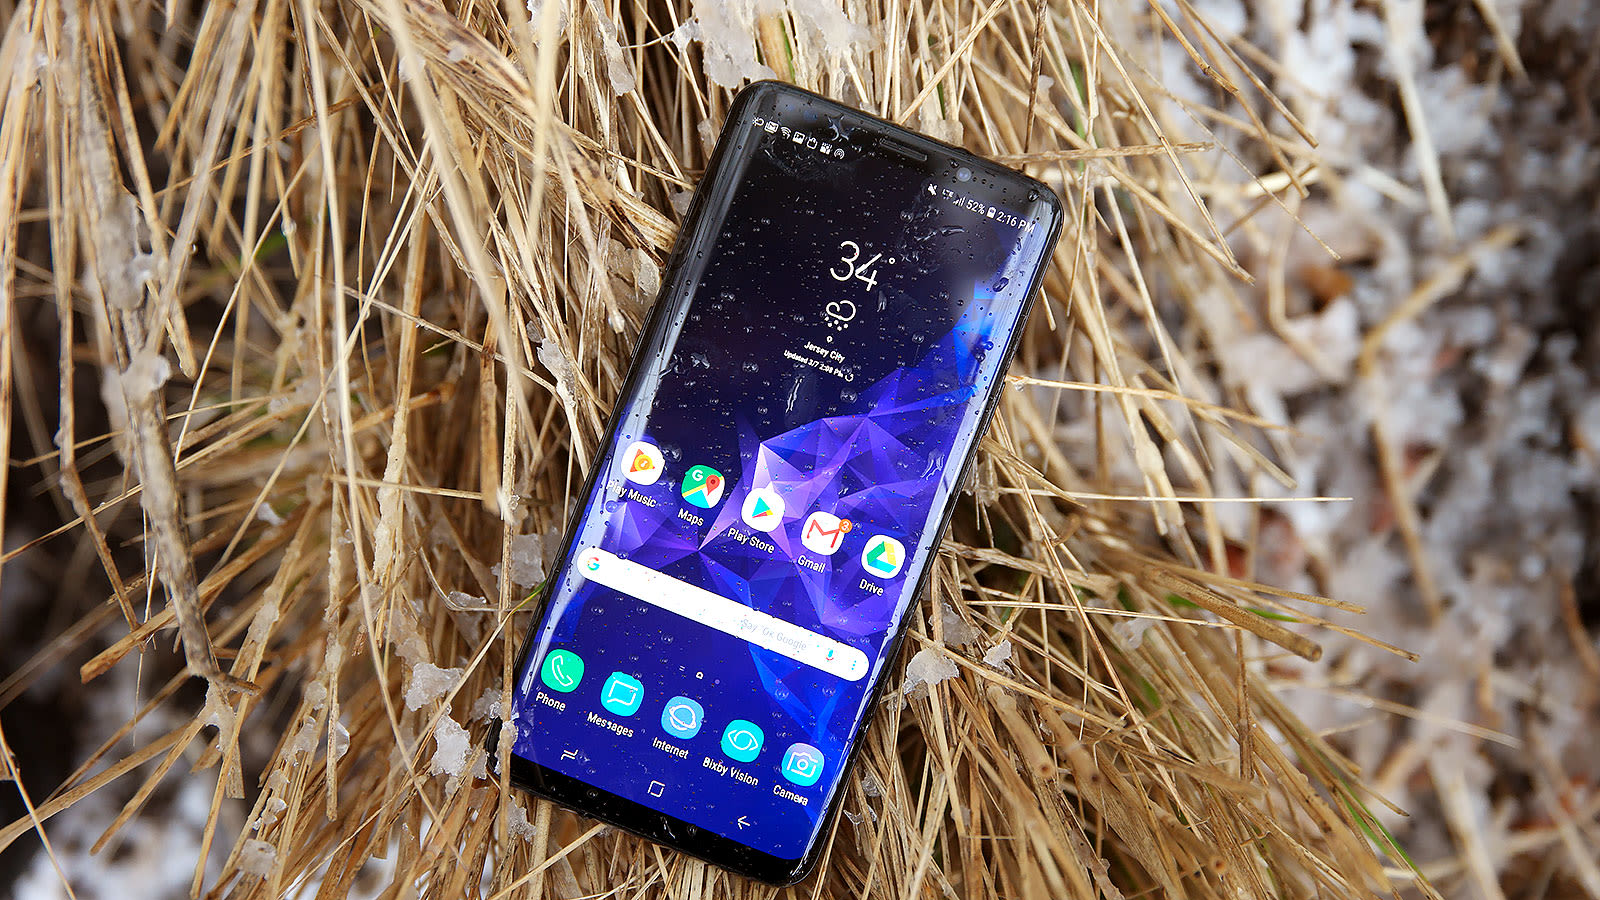 Verizon inks deal with Samsung to put more bloatware on Galaxy S9 and S9+